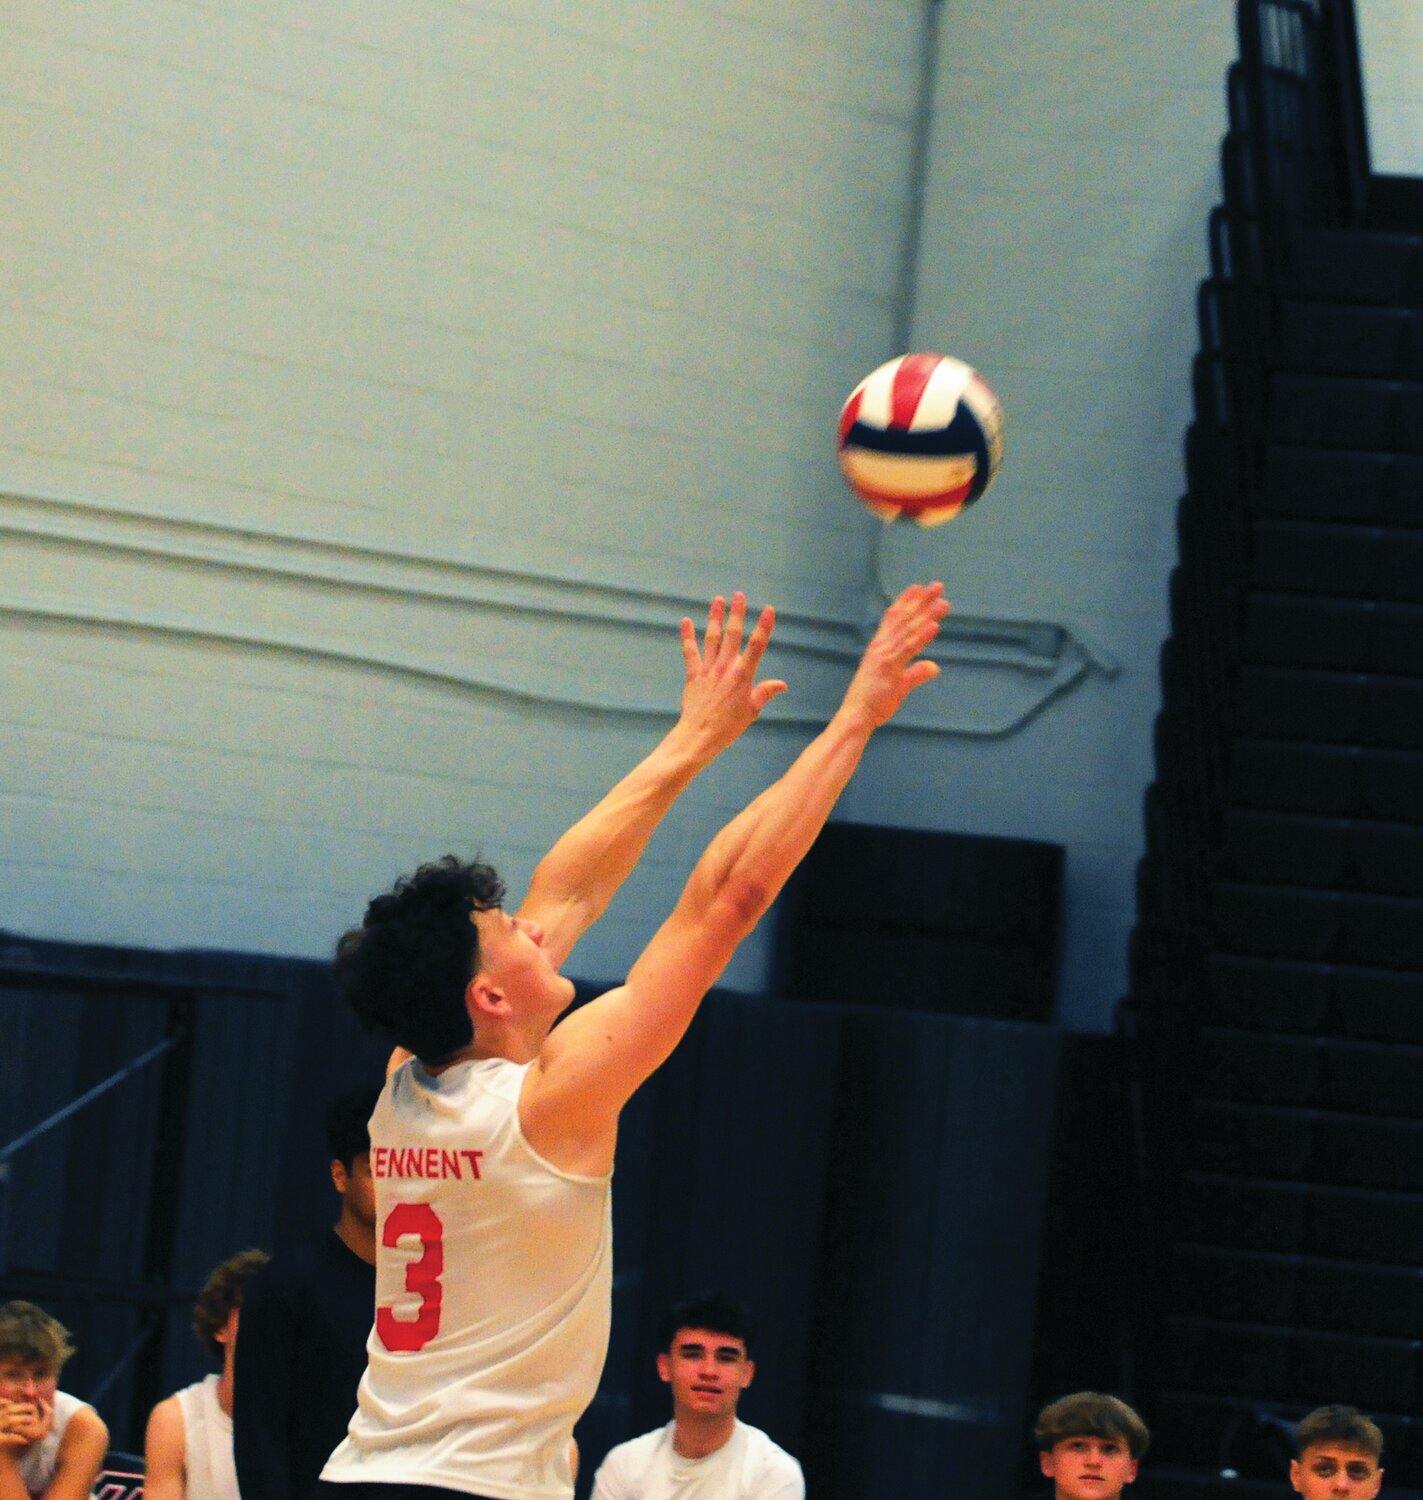 William Tennent senior Sean Stewart volleys a ball in the Panthers’ recent Suburban One League matchup with Pennsbury.